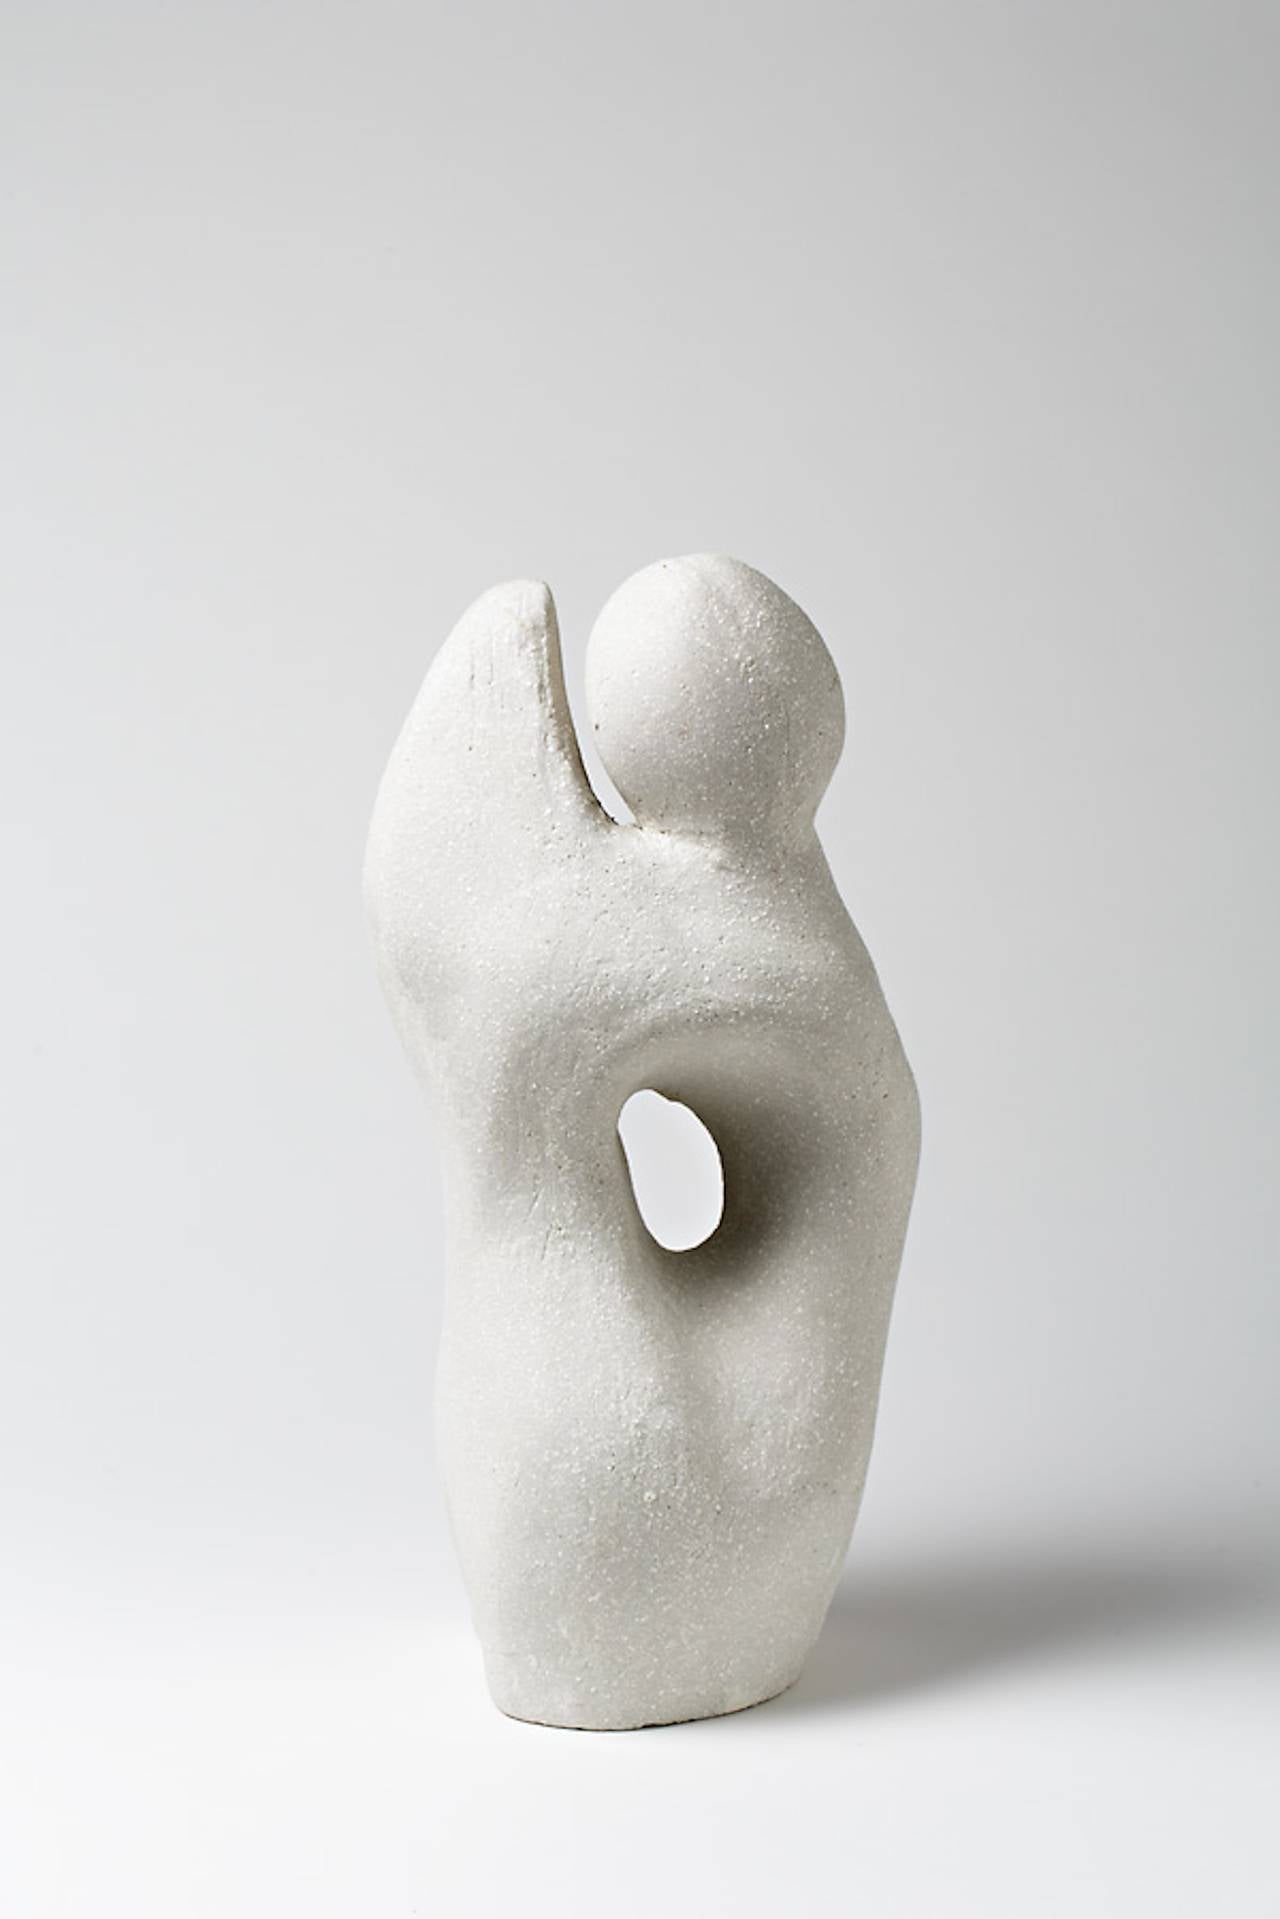 French Ceramic Sculpture by Tim Orr, circa 1970